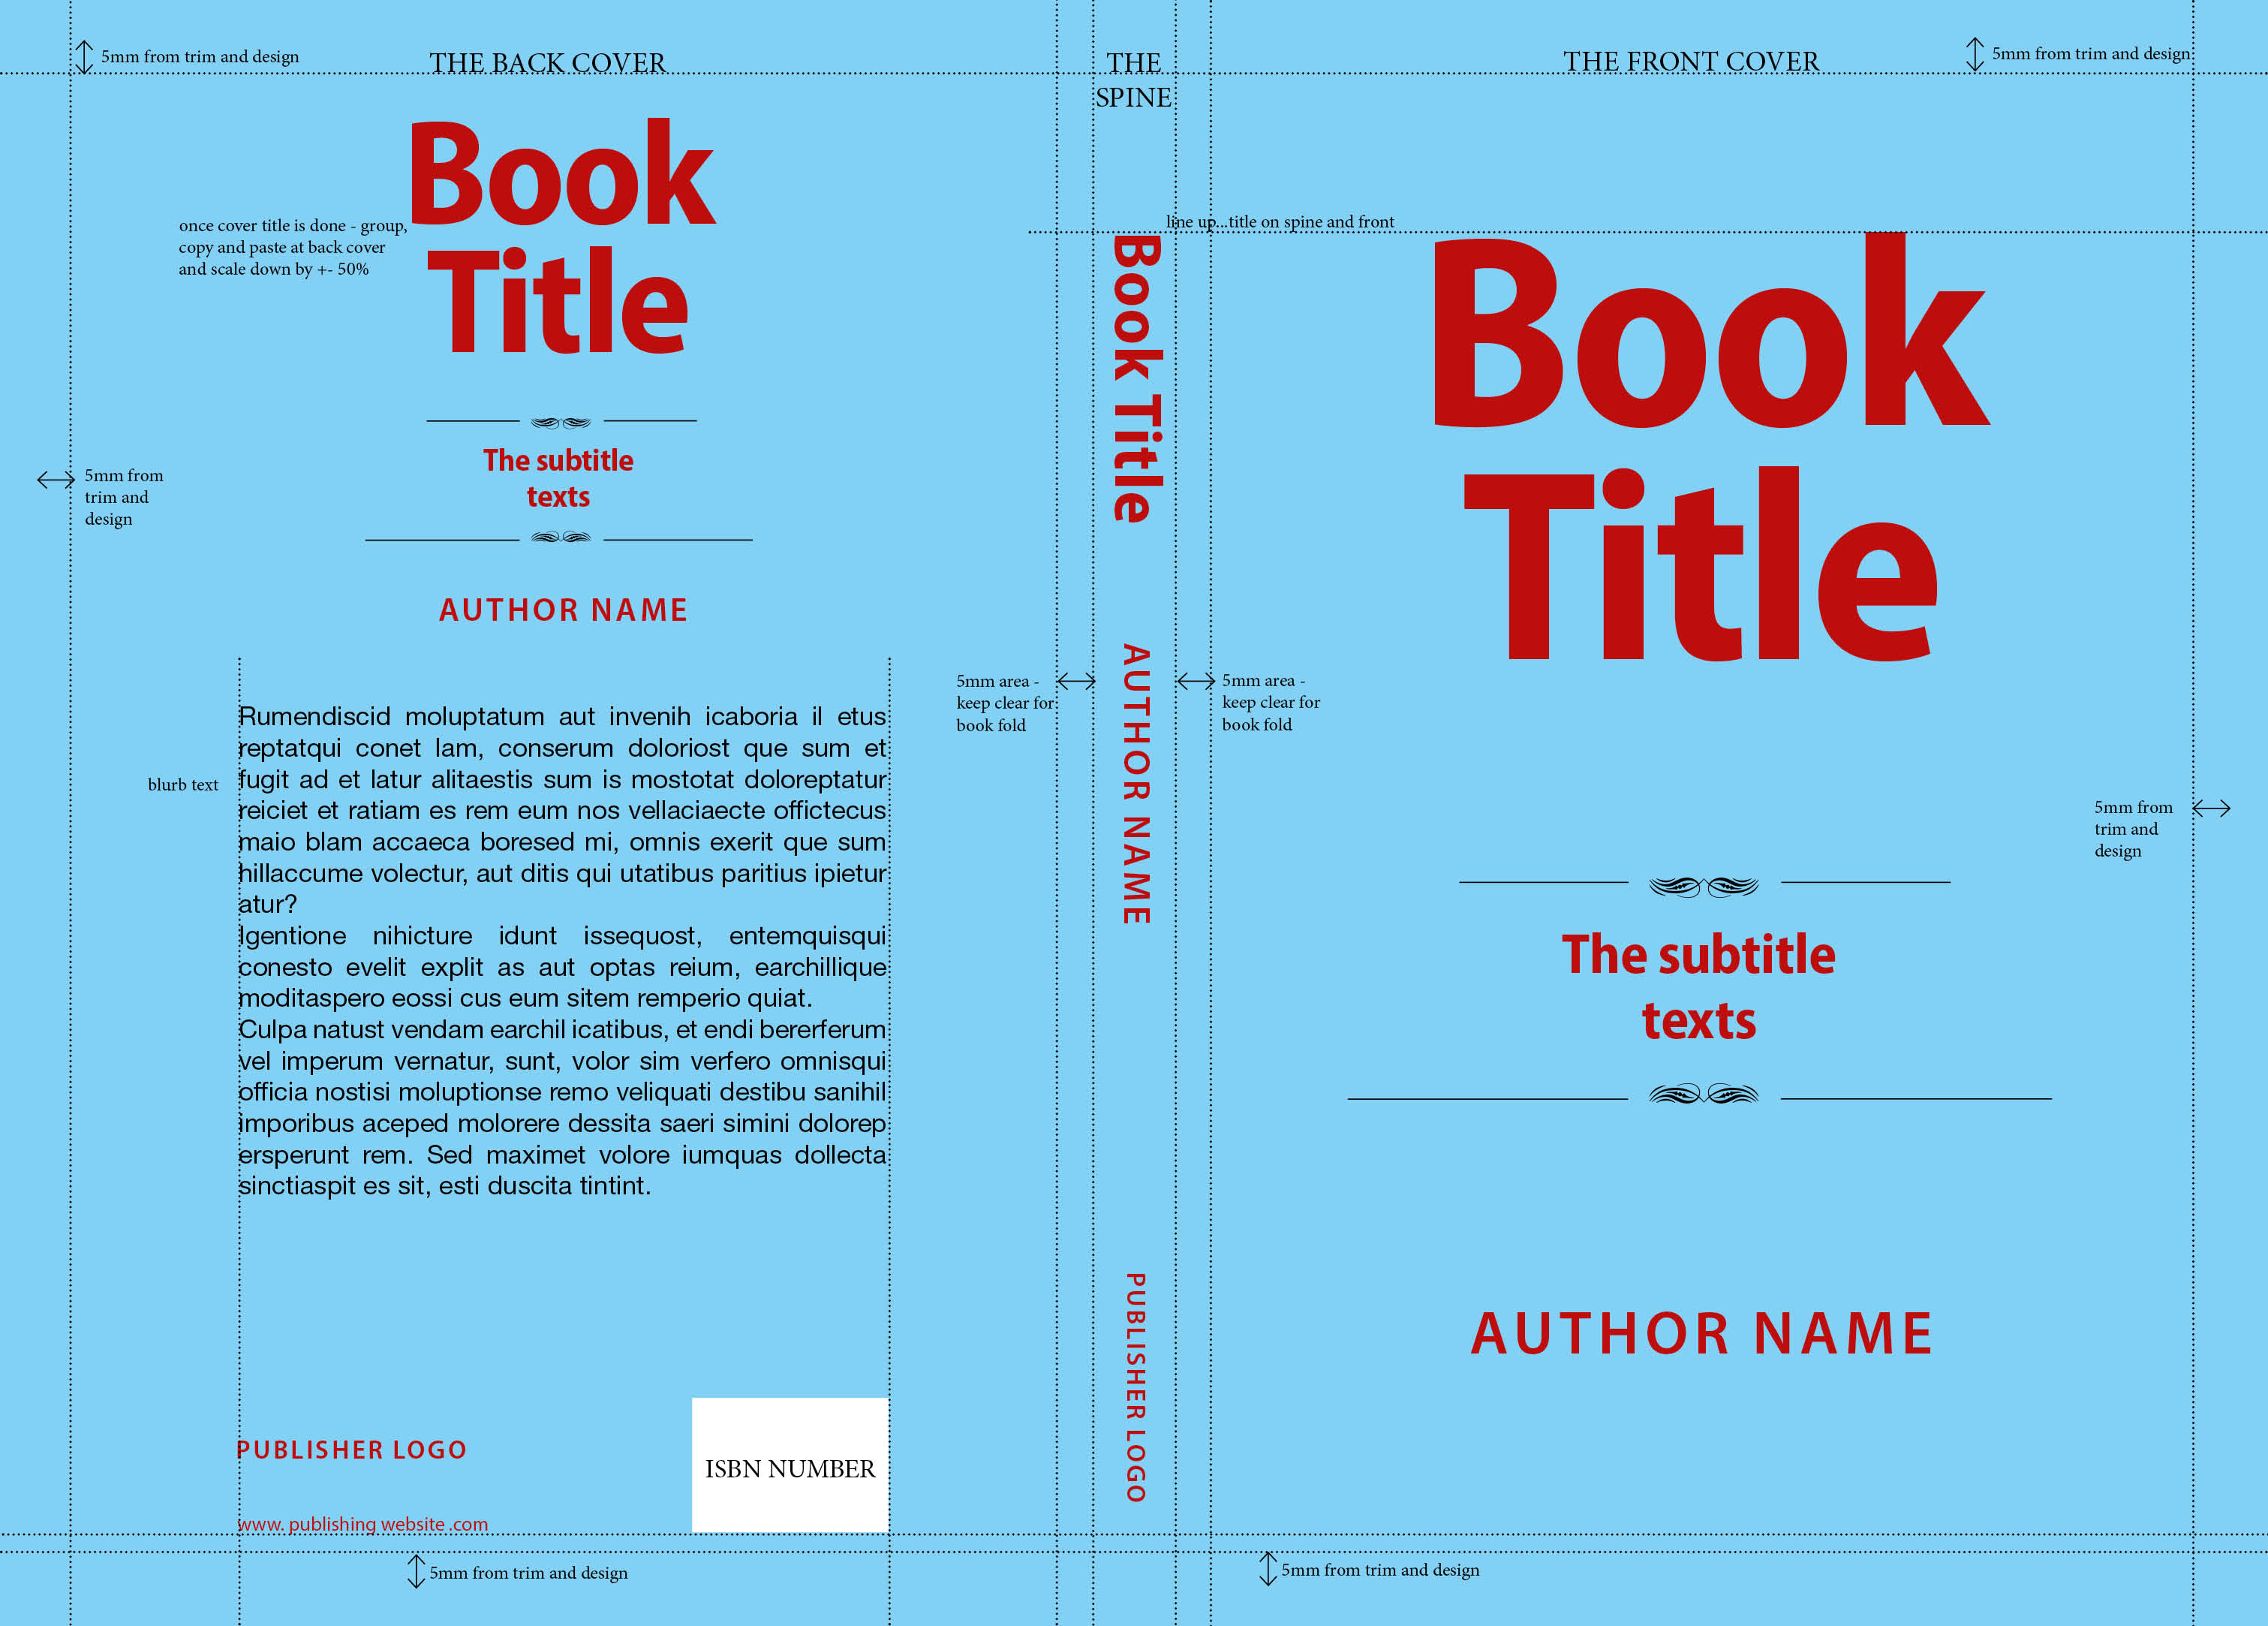 book front cover images